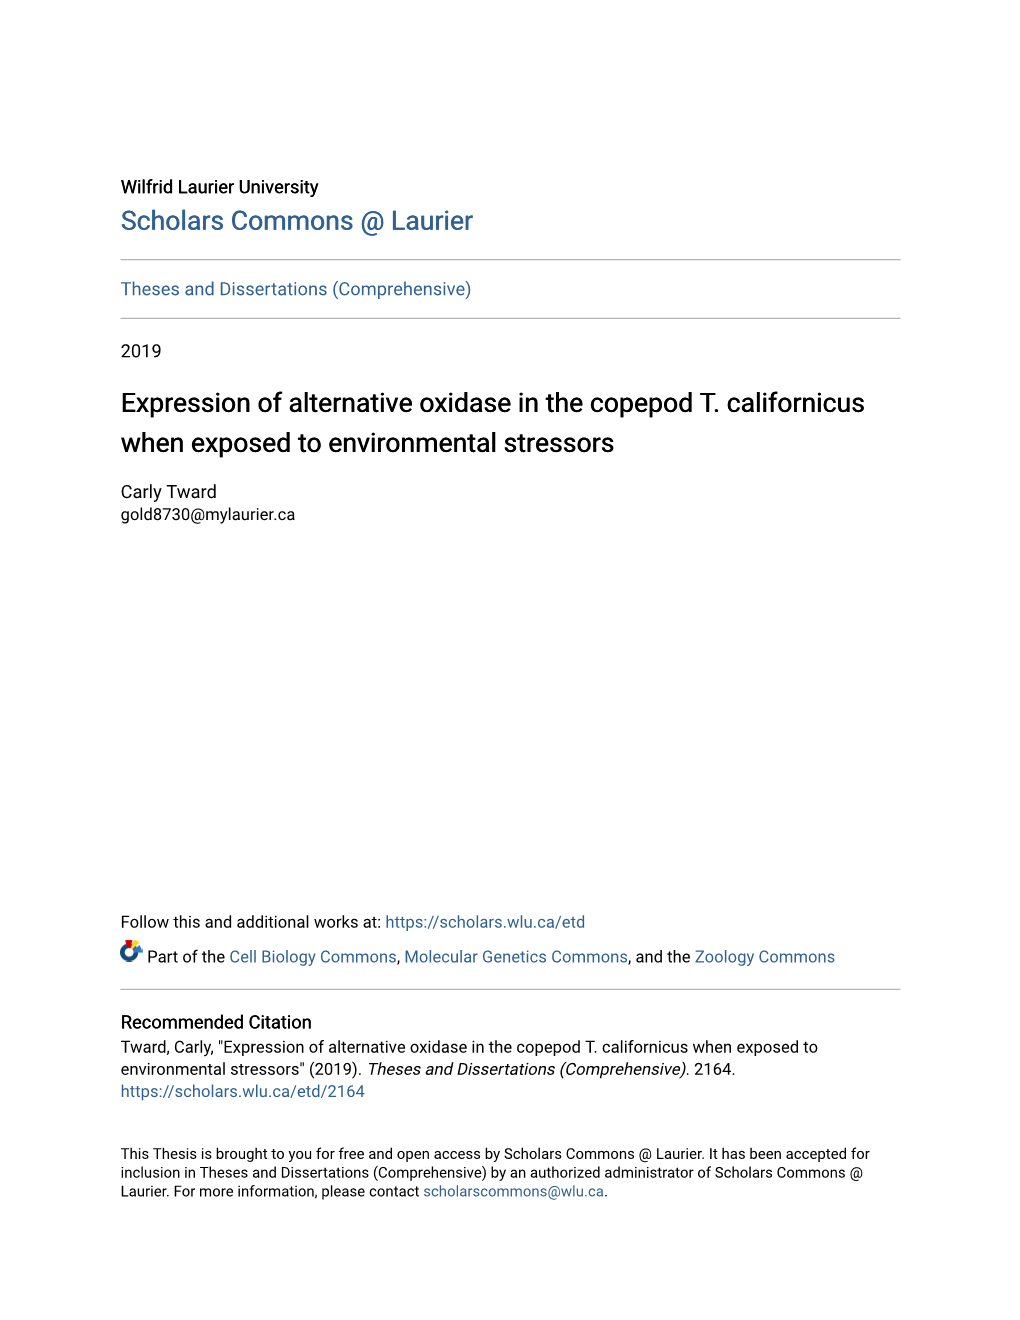 Expression of Alternative Oxidase in the Copepod T. Californicus When Exposed to Environmental Stressors